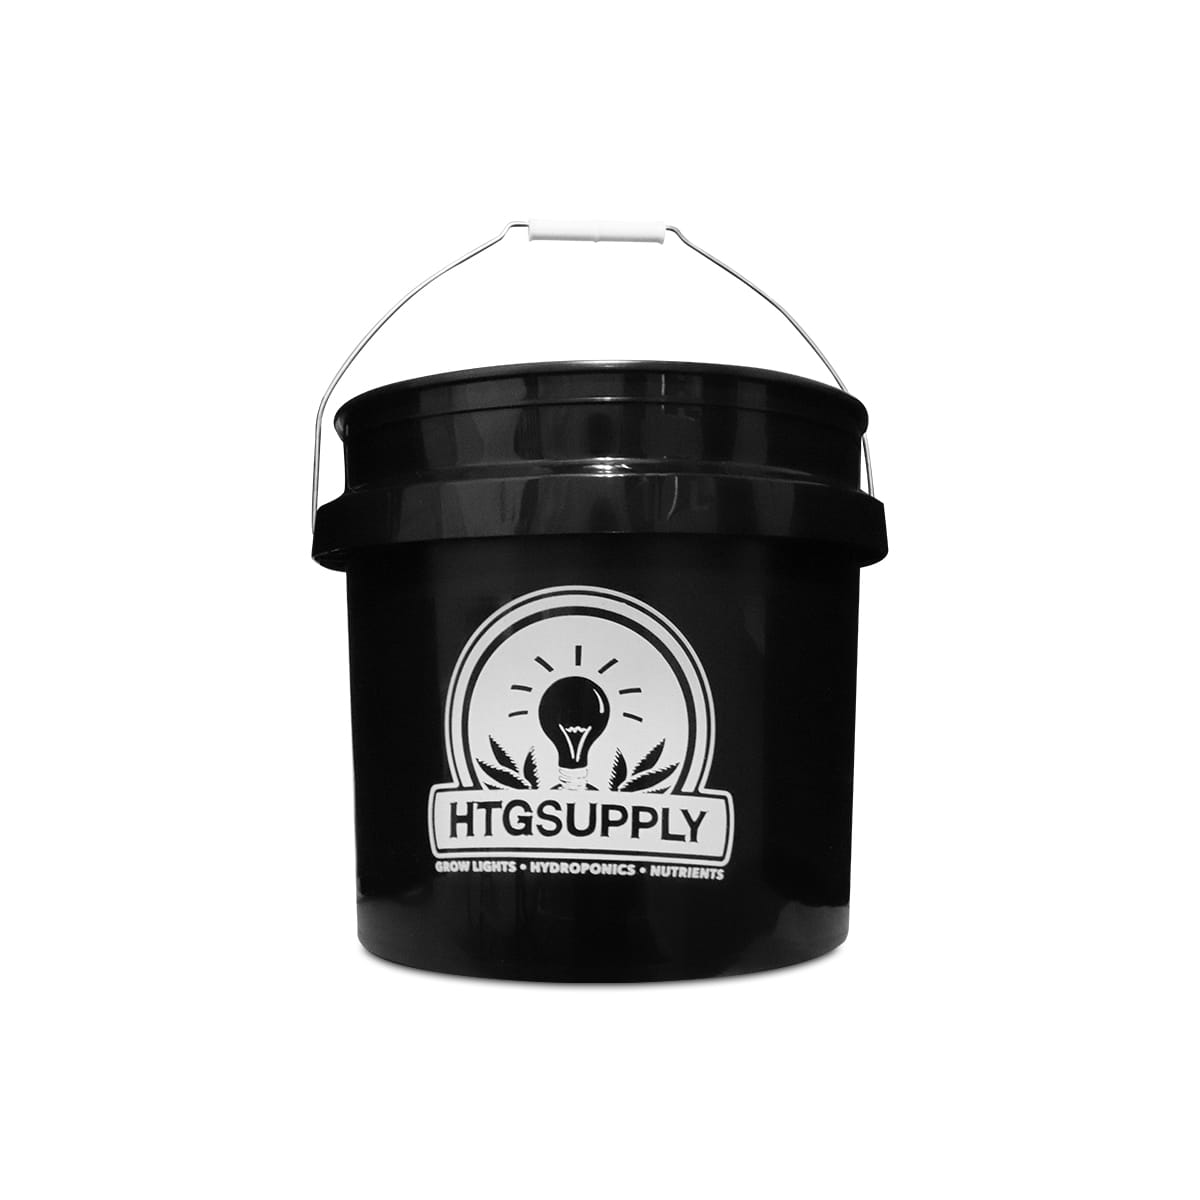 Hudson Exchange Premium 3.5 Gallon Bucket with Spouted Lid, HDPE, Black, 4 Pack